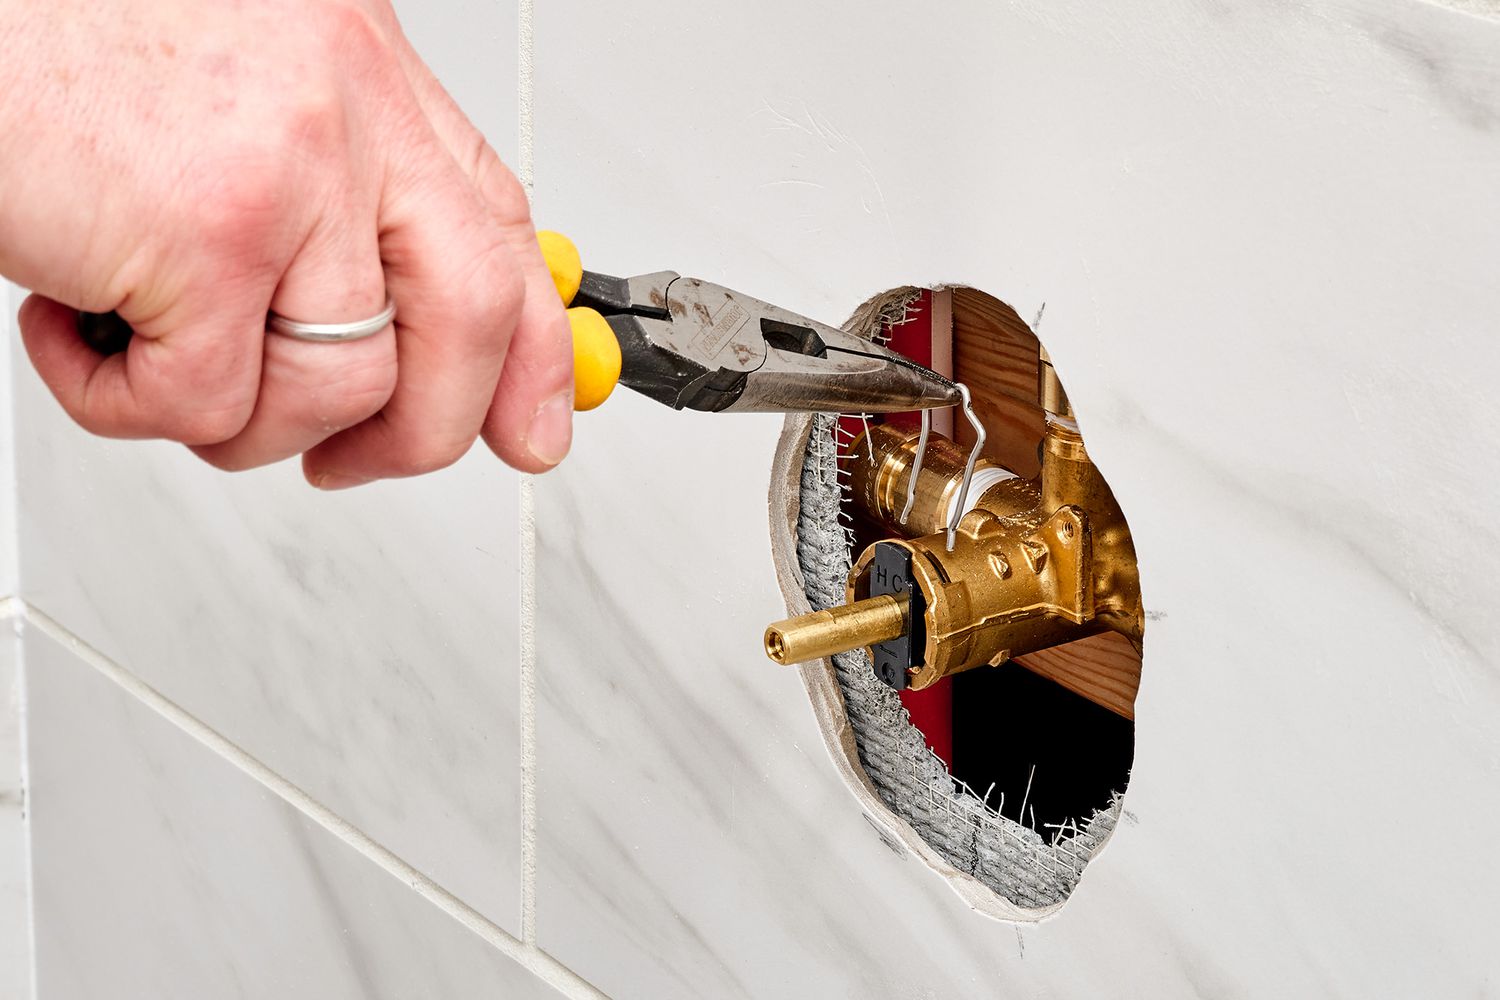 How To Replace A Shower Faucet Cartridge